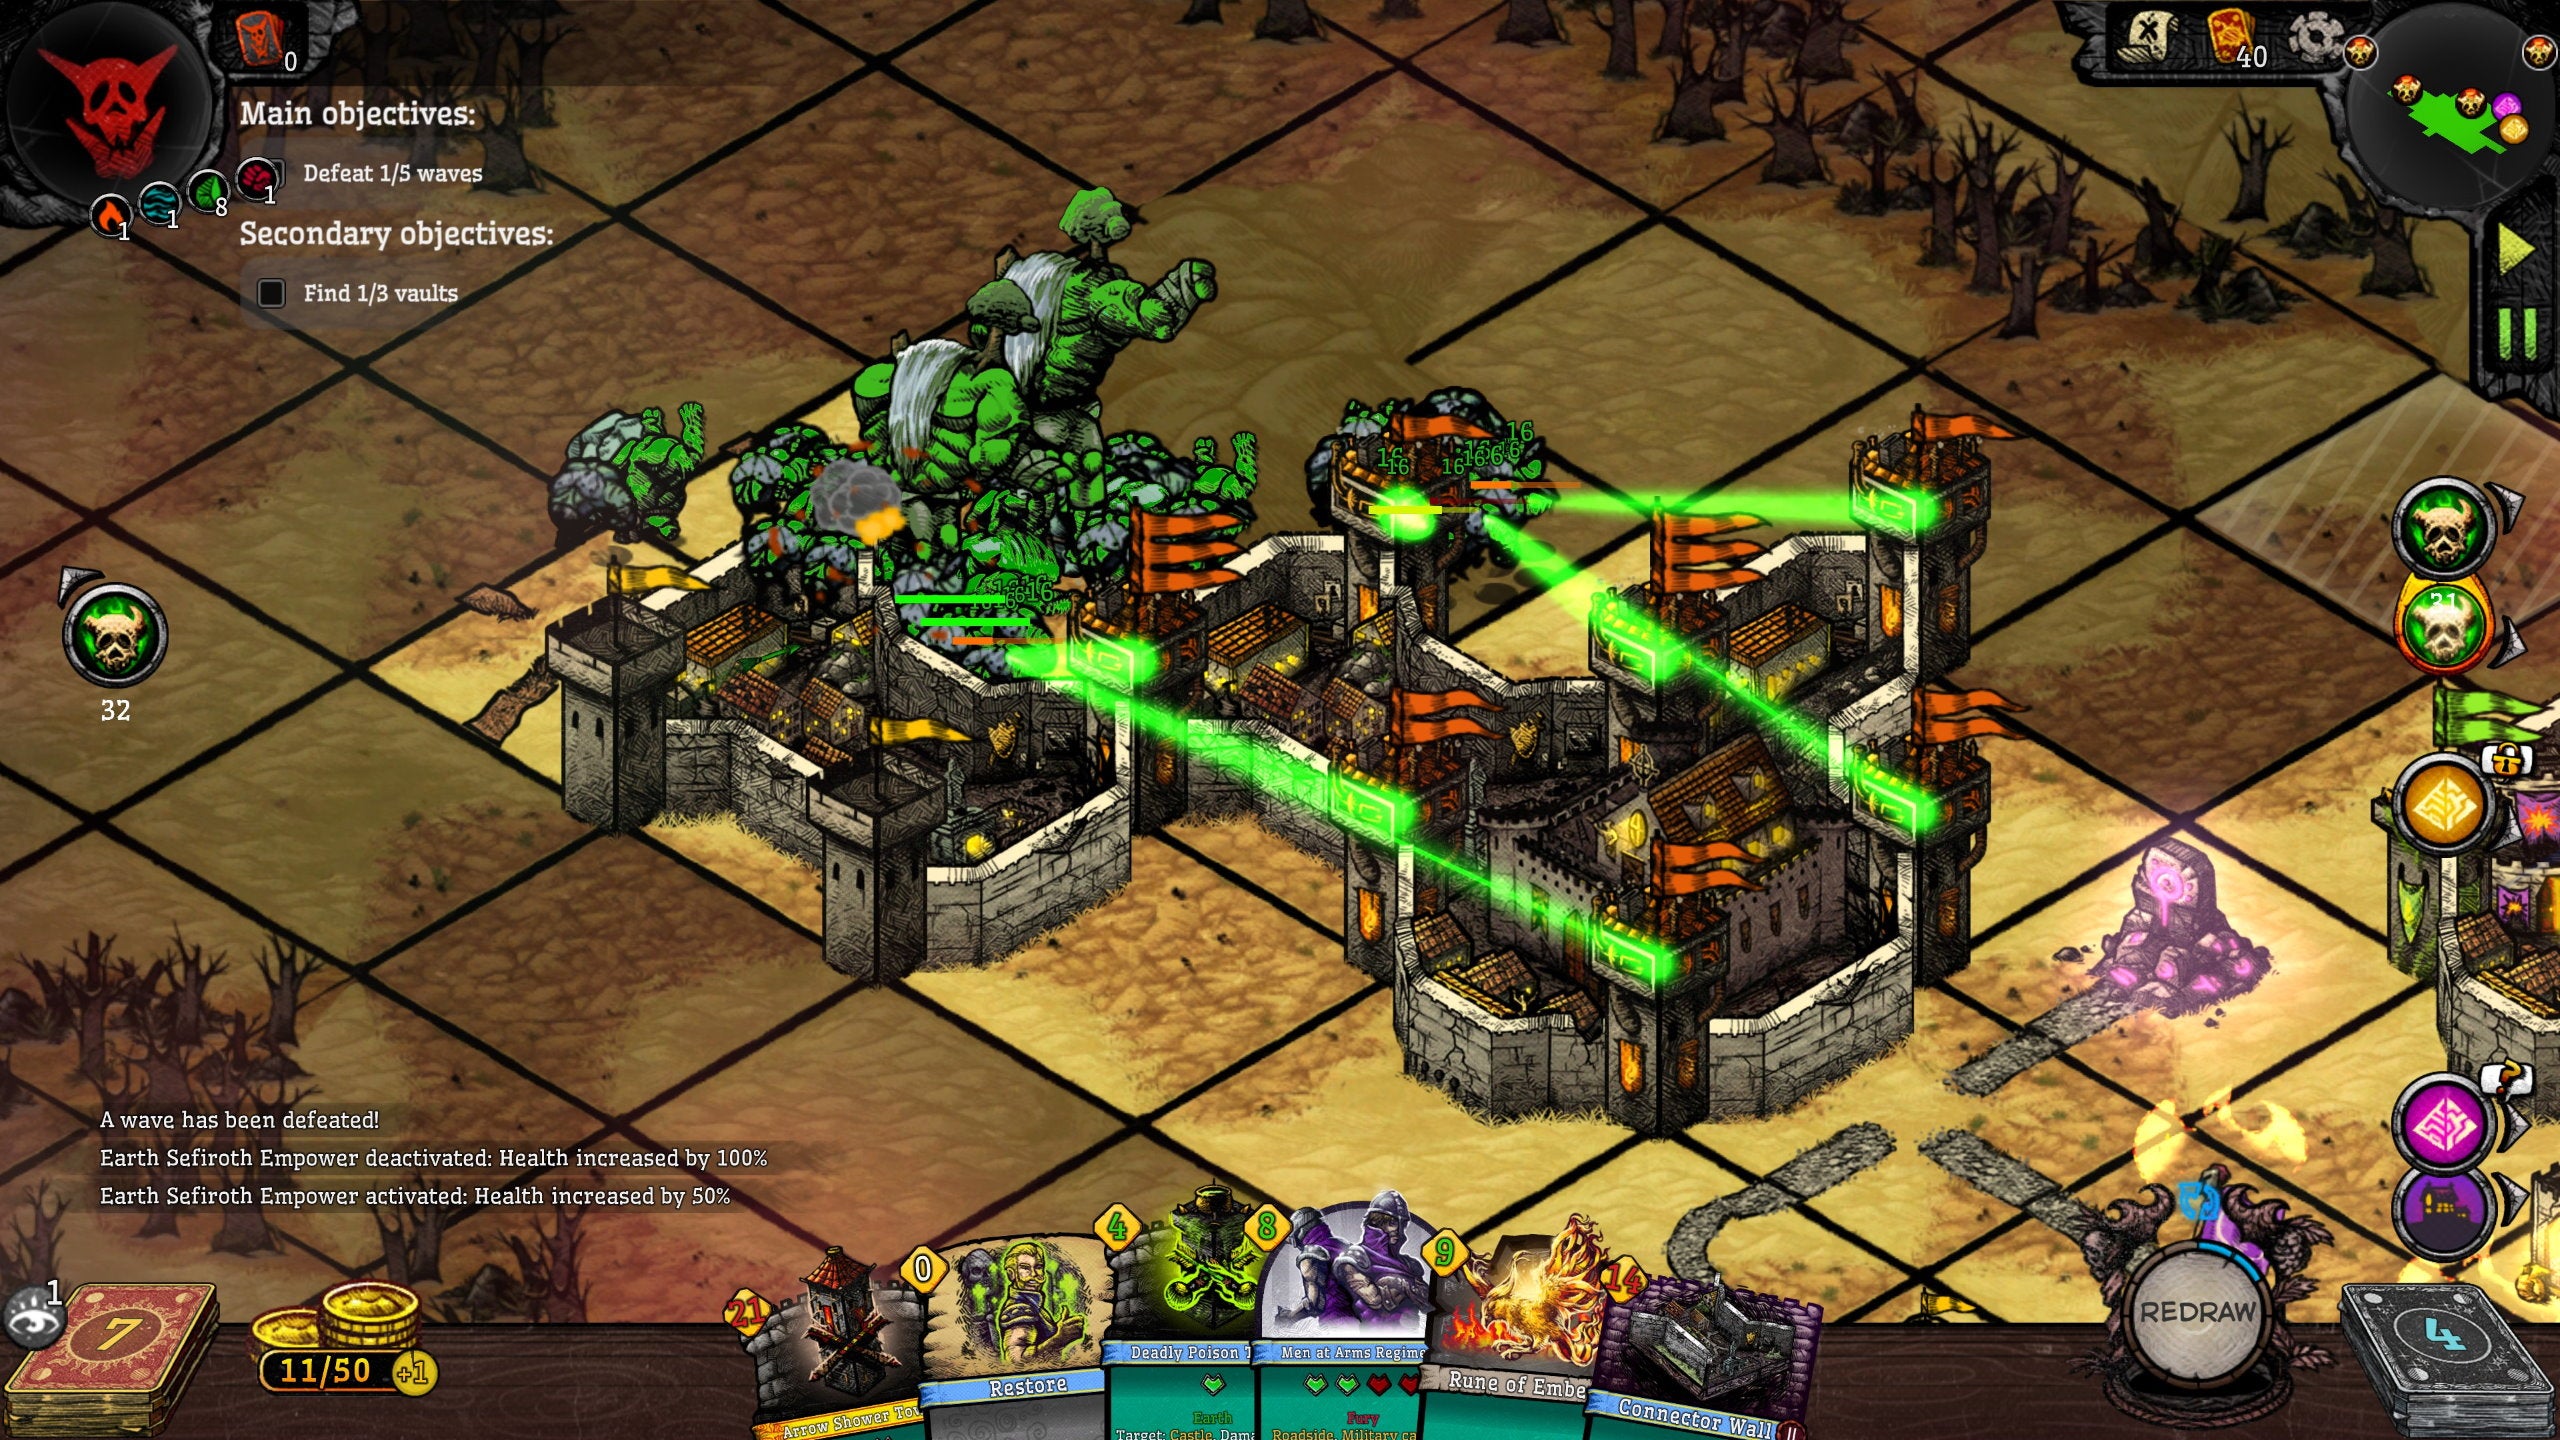 A castle fires laser beams at a large army of orcs in ORX